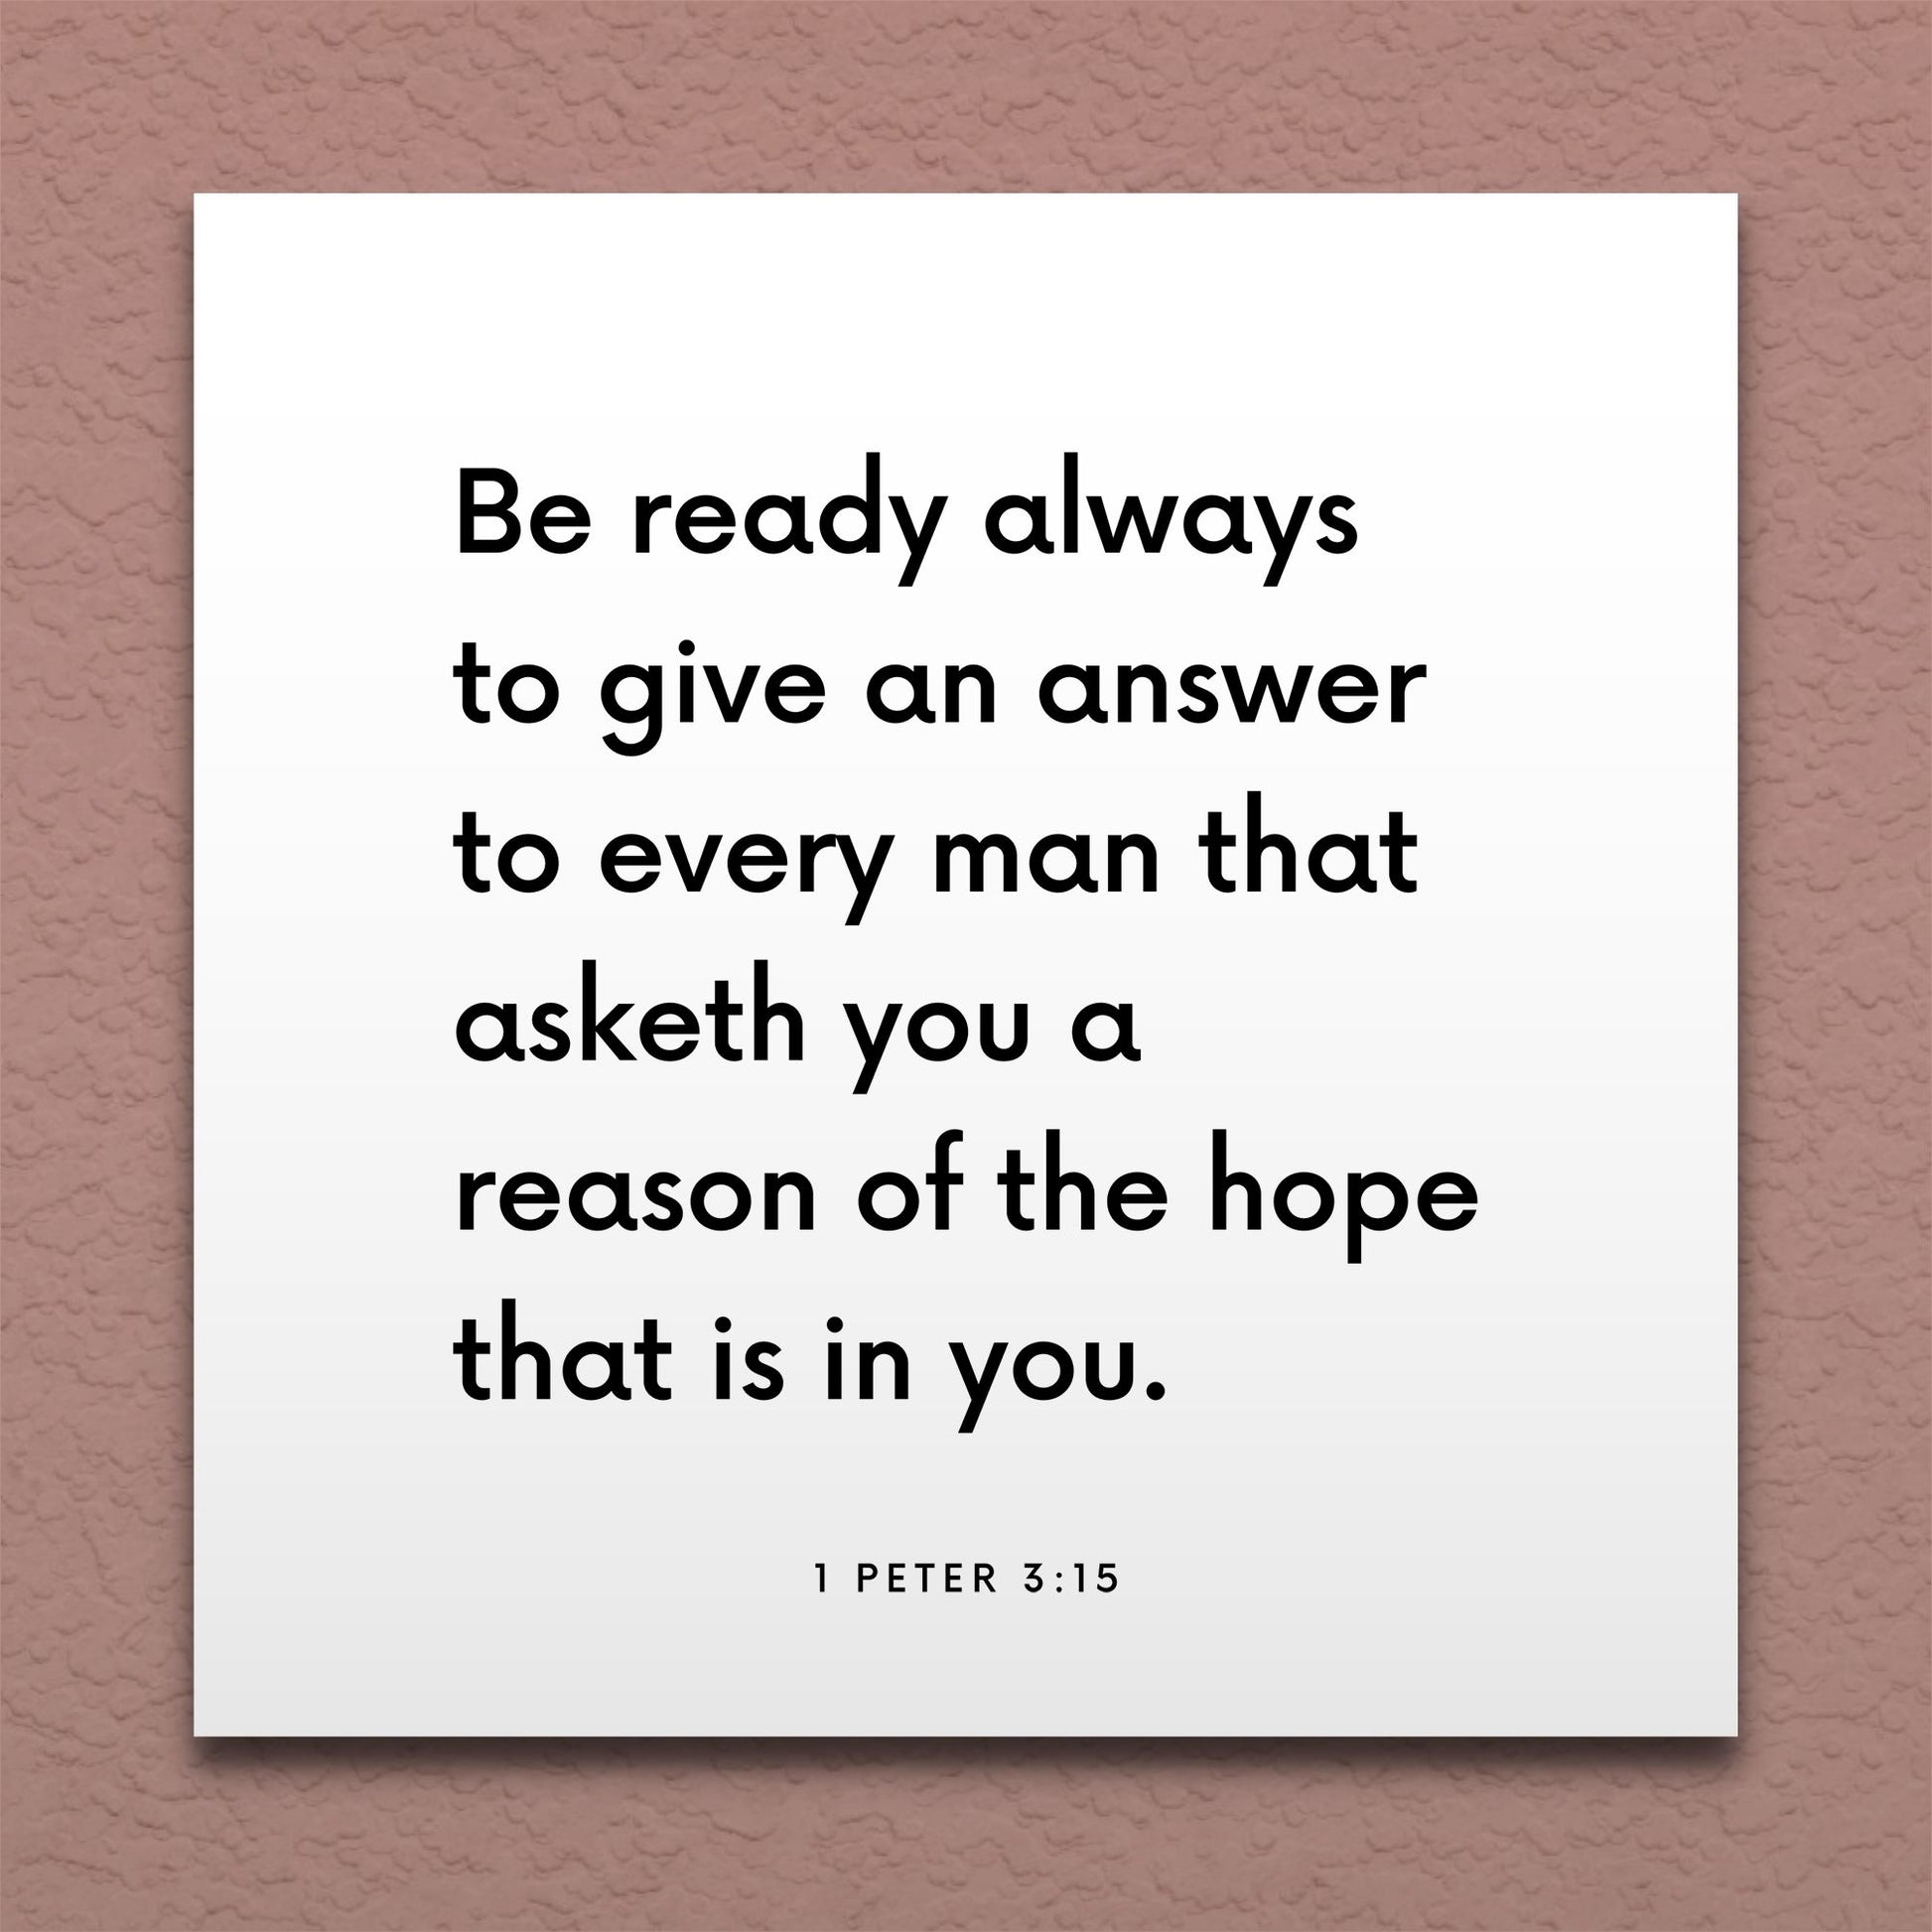 Wall-mounted scripture tile for 1 Peter 3:15 - "Be ready always to give an answer to every man that asketh"